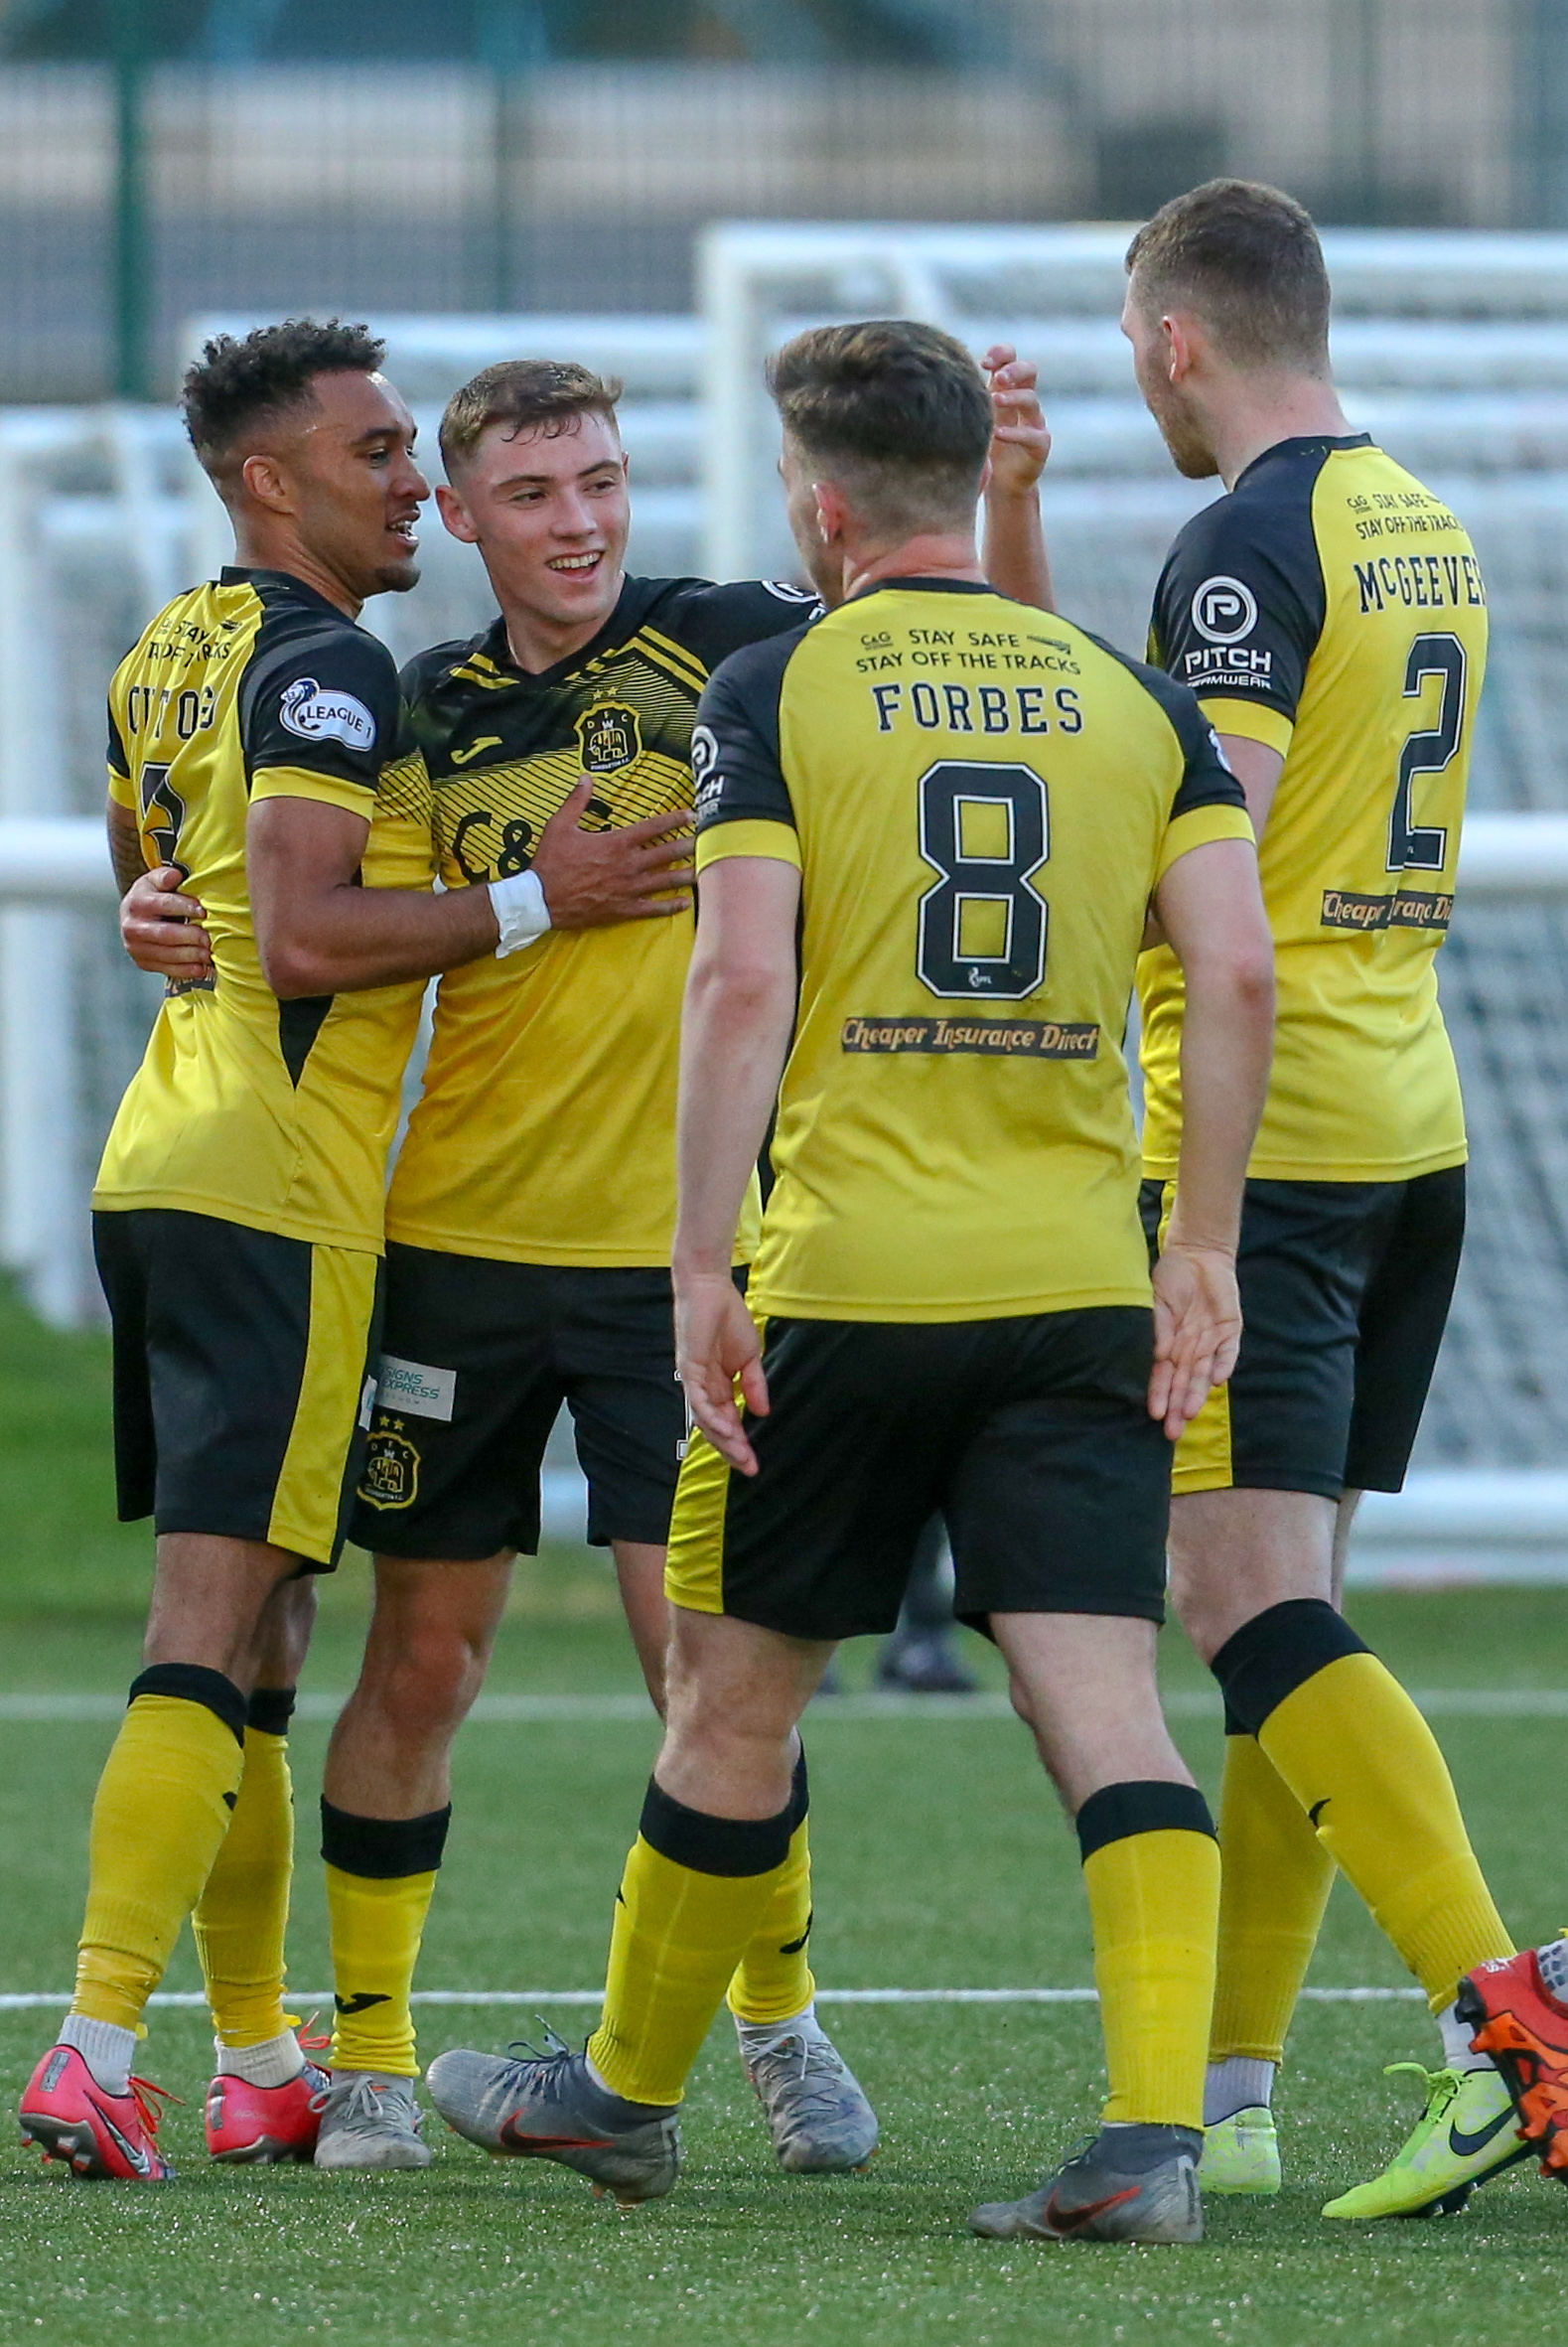 Dumbarton came from behind to beat Edinburgh City 3-1 in the first leg of the SPFL League Two play-off final at Ainslie Park on Monday (Photo - Andy Scott)